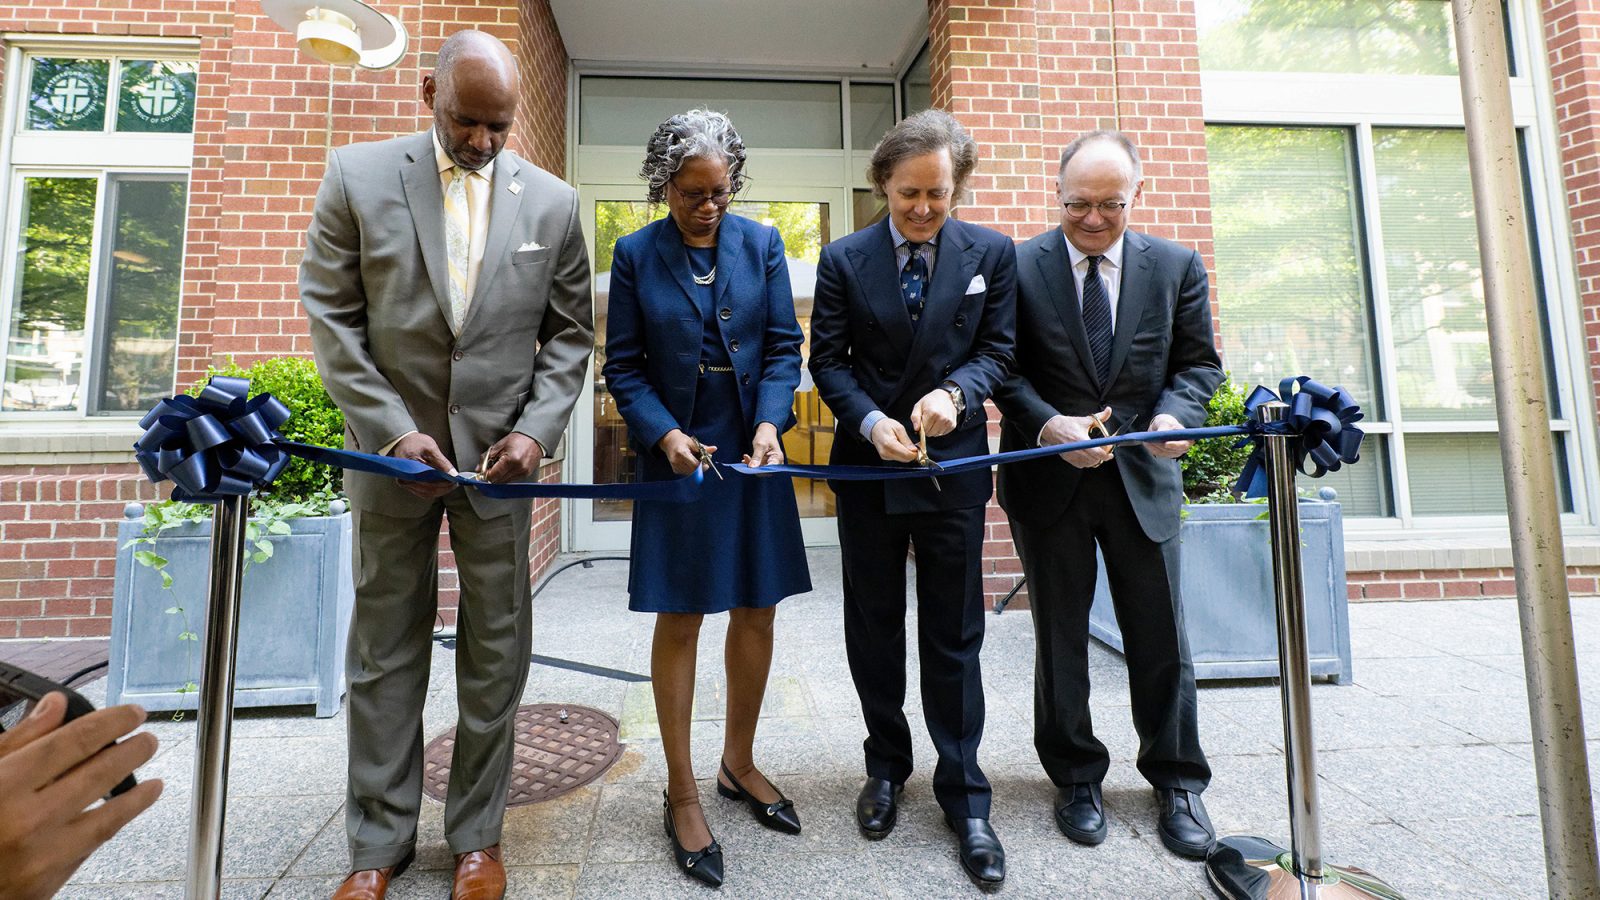 Cutting the ceremonial ribbon to officially open the Ralph Lauren Center are (l to r) Wayne Turnage, D.C.&#039;s Deputy Mayor for Health and Human Services; Lucile Adams-Campbell, PhD, founding director of the Ralph Lauren Center; David Lauren, son of Ralph Lauren and president of the Ralph Lauren Corporate Foundation; and Georgetown University President John J. DeGioia.